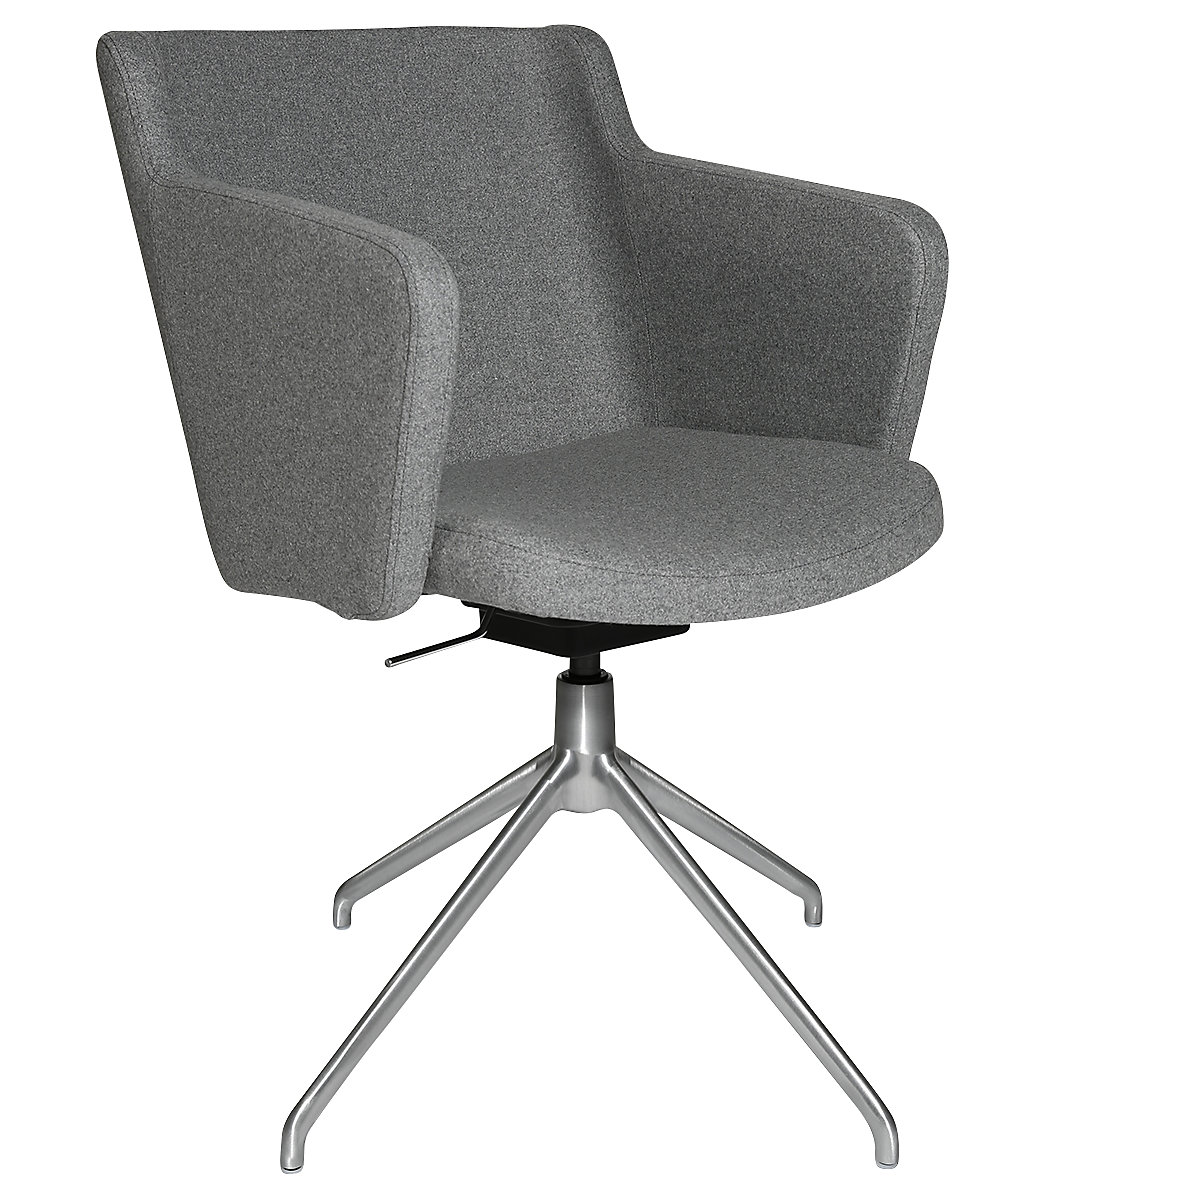 SFH visitors’ chair – Topstar, 3D seat joint and aluminium five star base, light grey-16